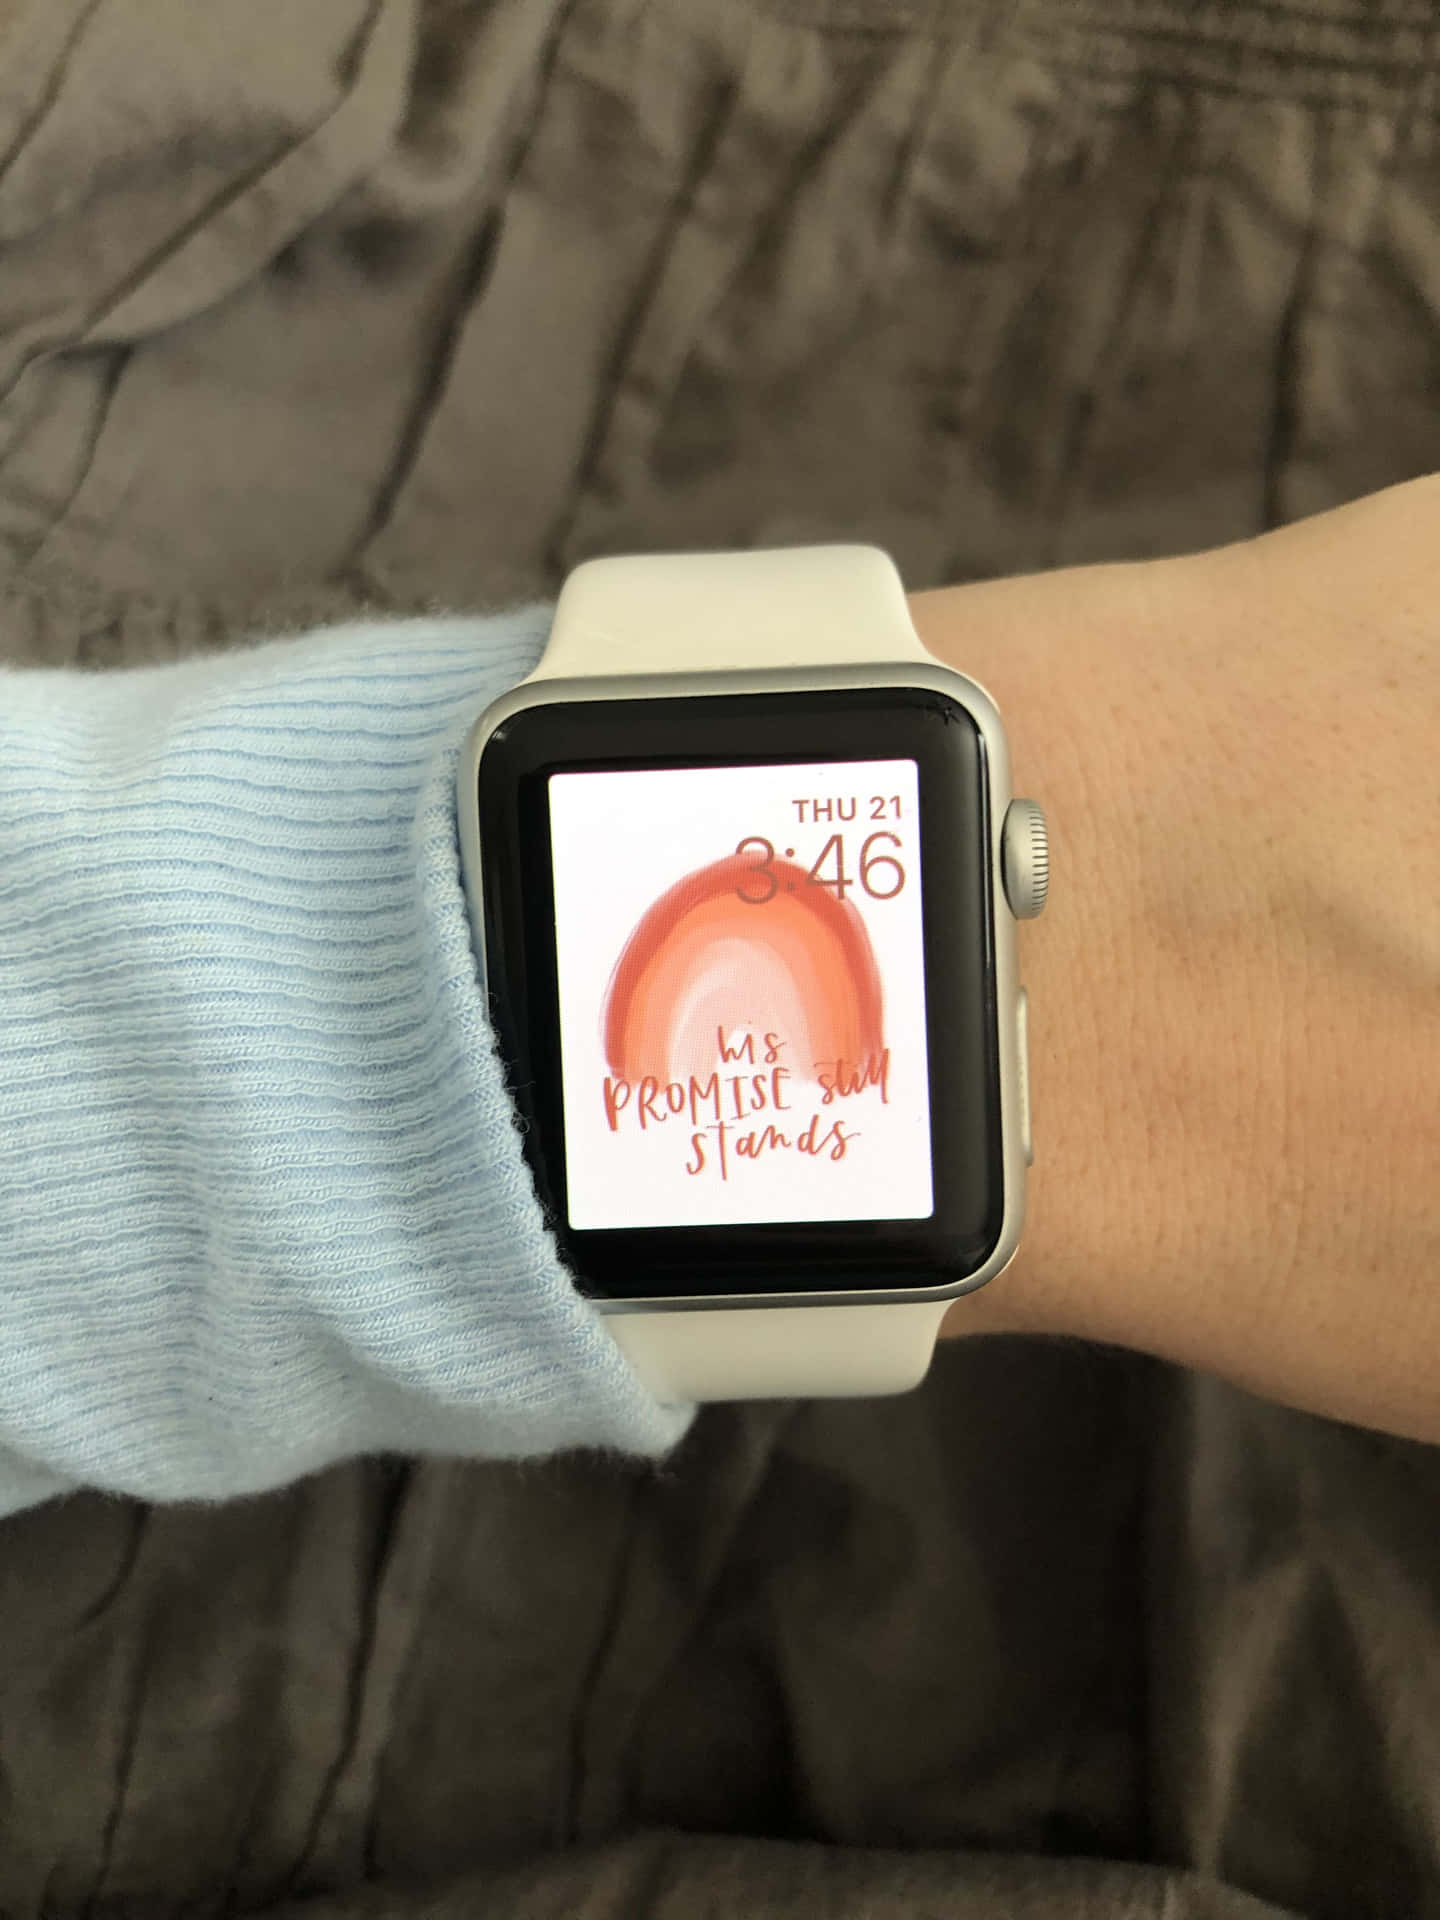 "The Perfect Accessory: The Apple Watch"